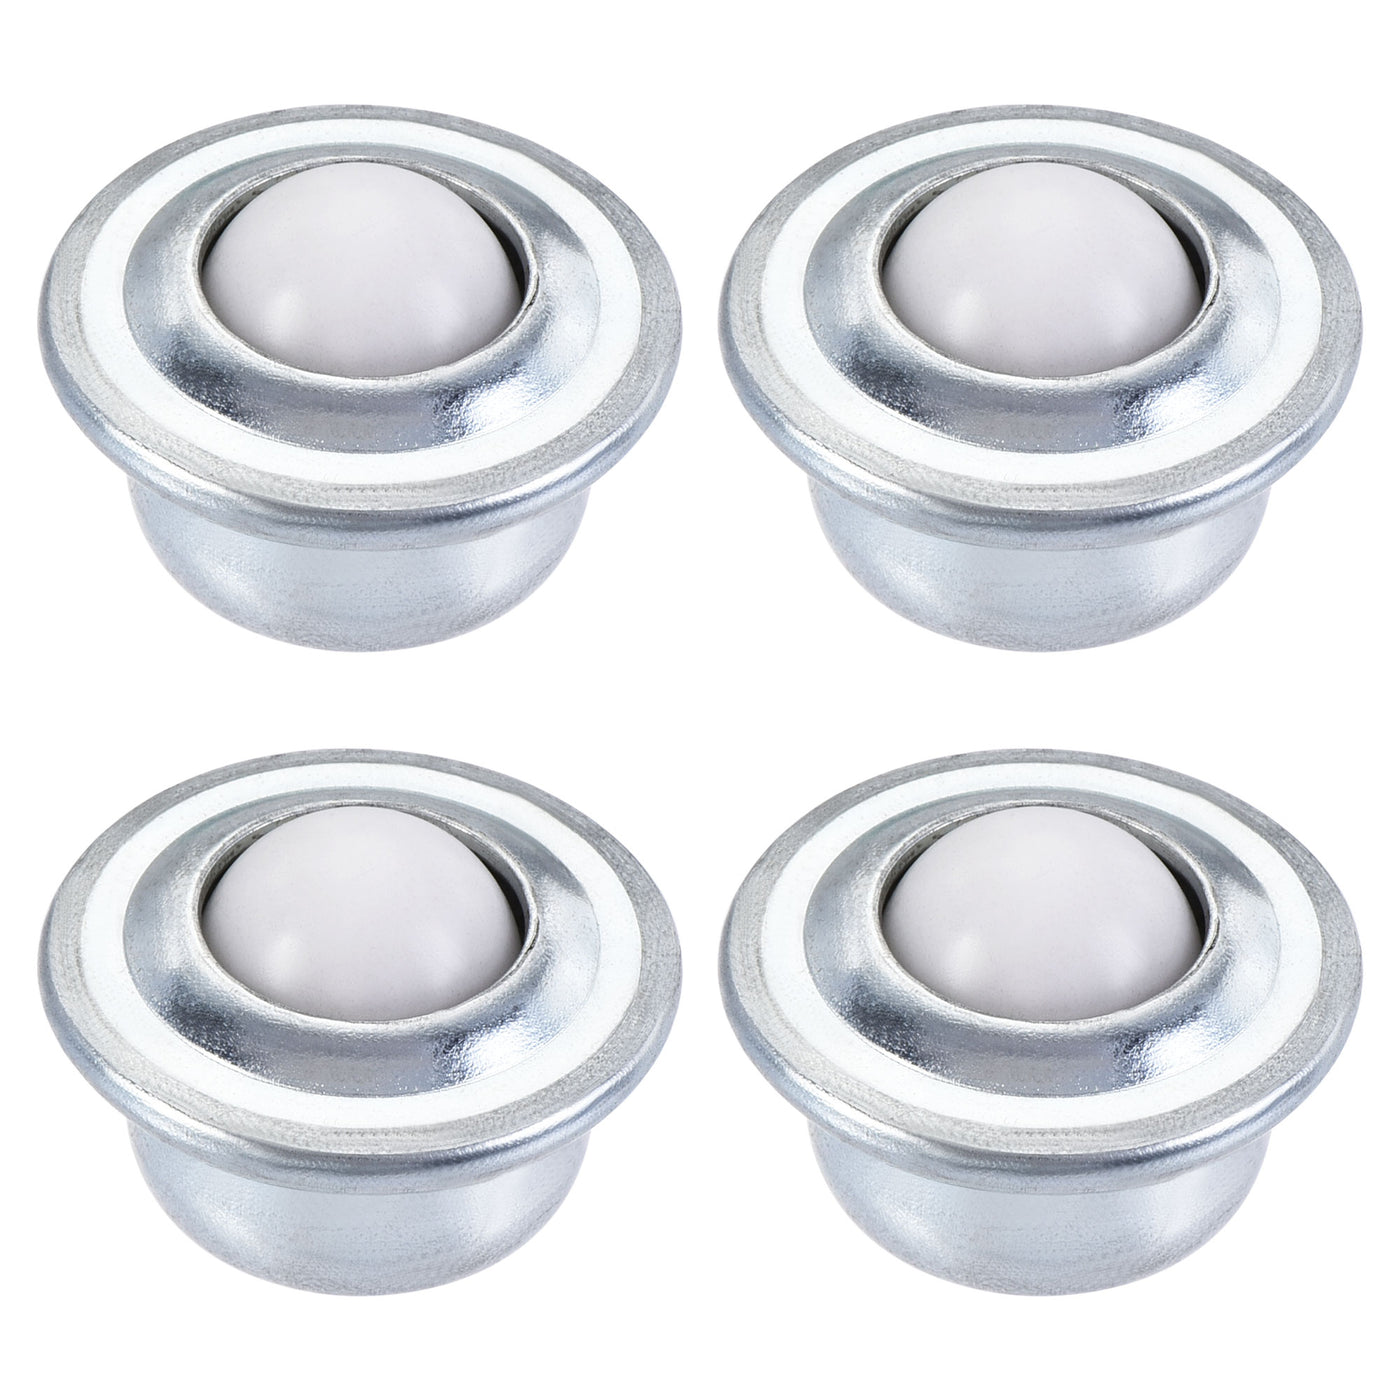 uxcell Uxcell Ball Transfer Bearing Unit mm Lbs Nylon Drop-in Type for Transmission 4pcs